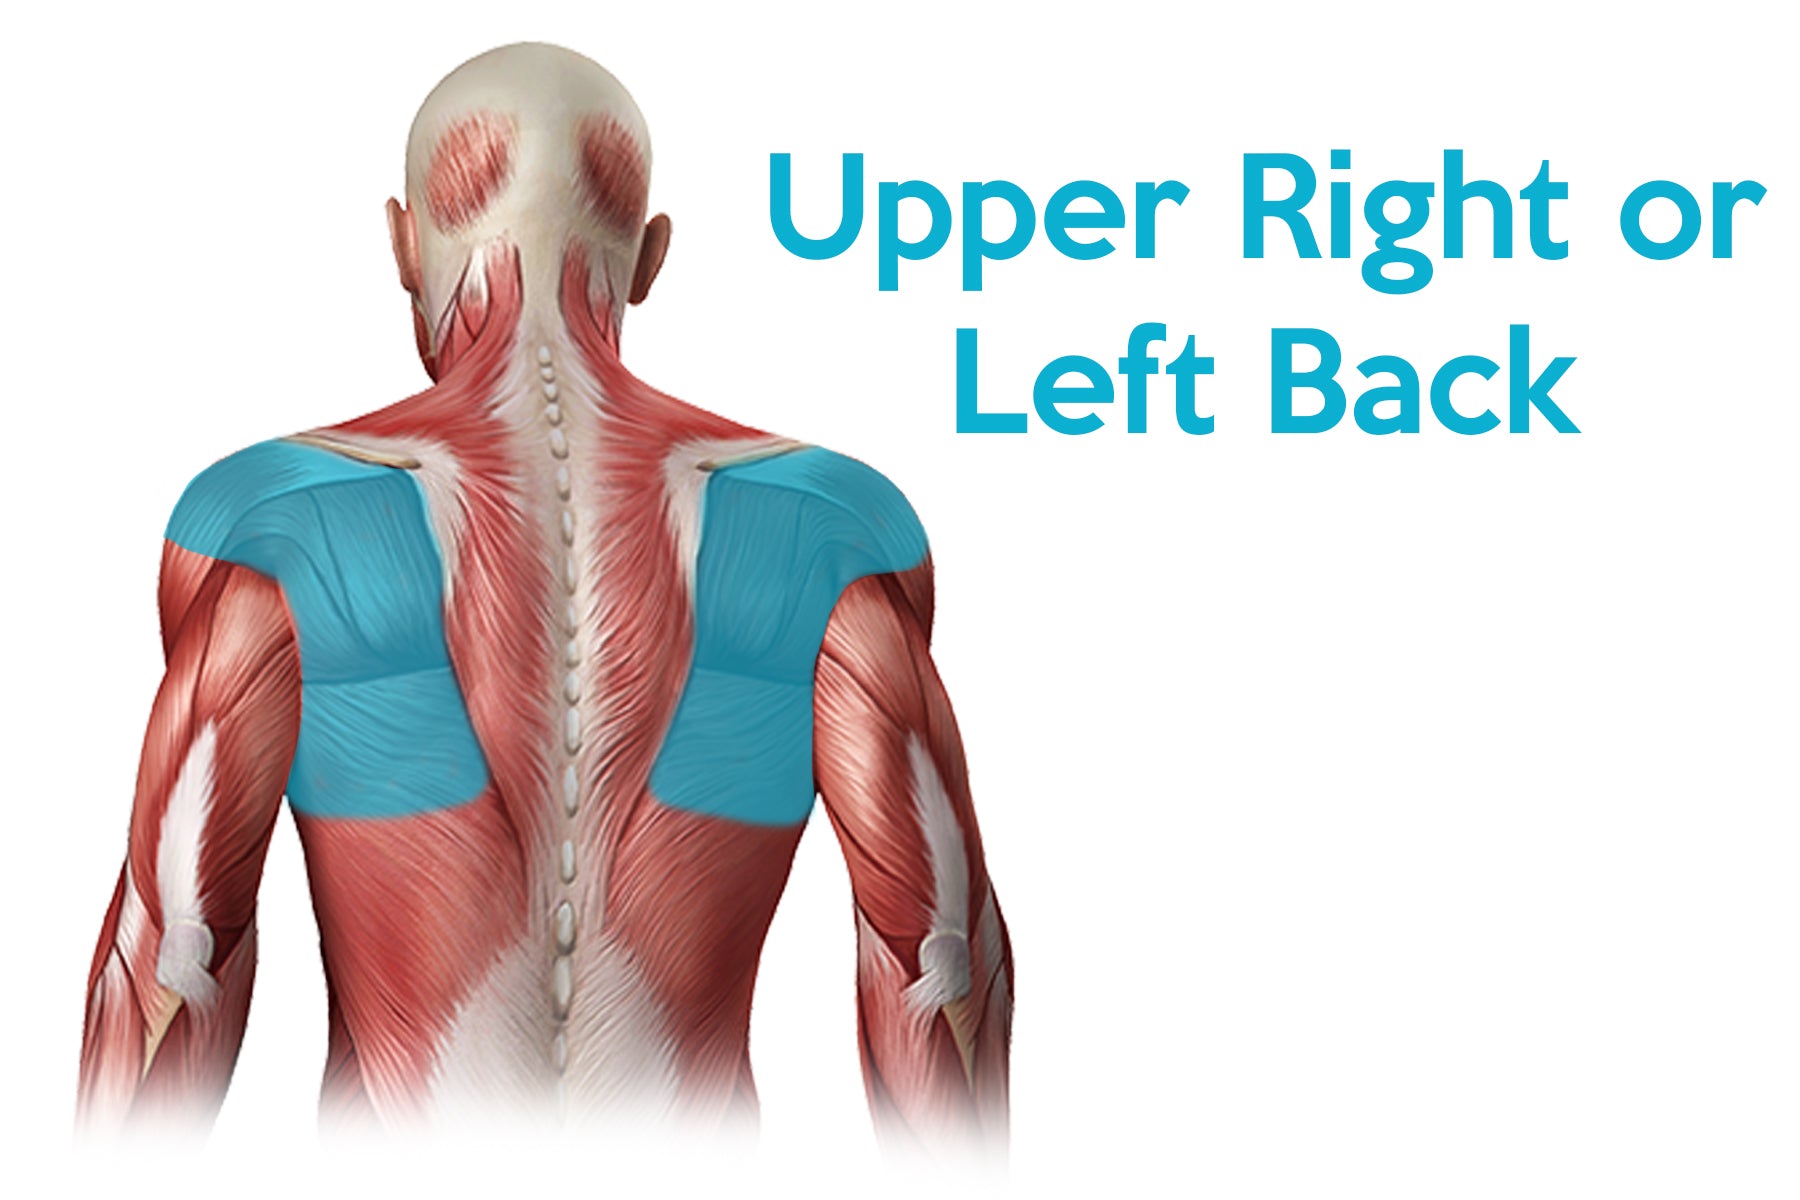 Upper Back Pain | What's Causing the Top of my Spine to Hurt?